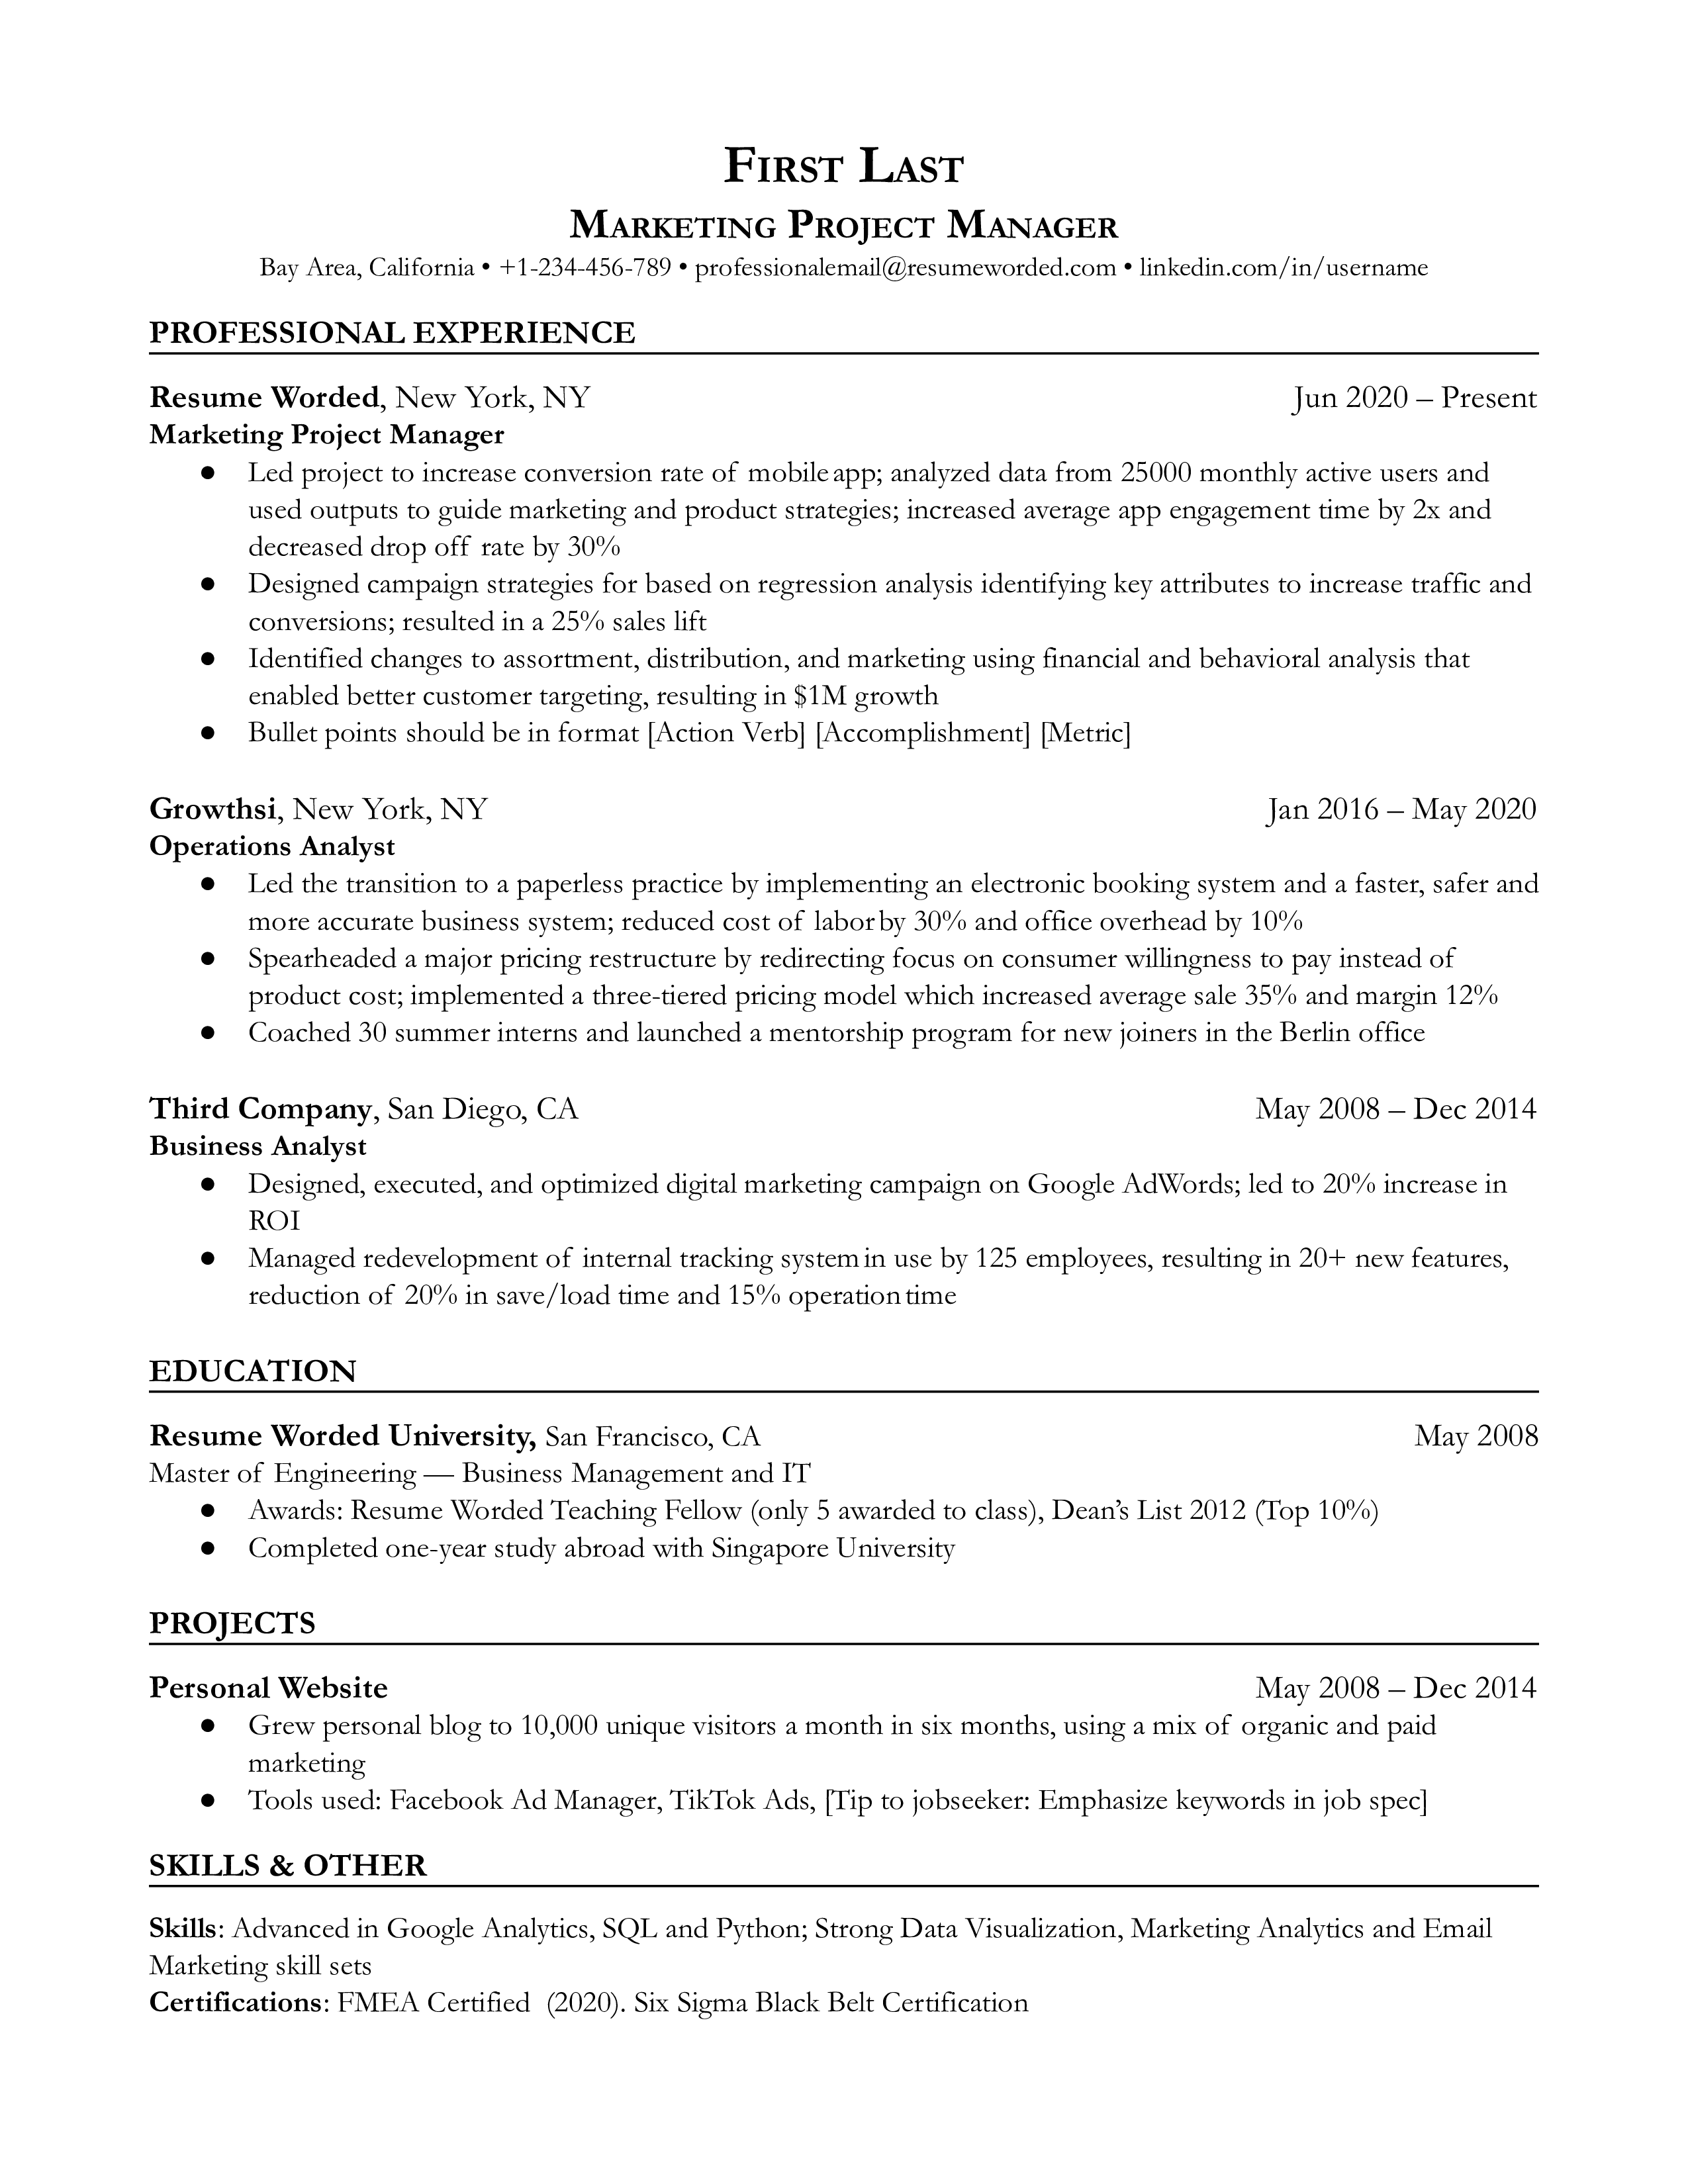 A Marketing Project Manager resume highlighting experience in managing marketing projects, working with cross-functional teams, and delivering projects on time and within budget